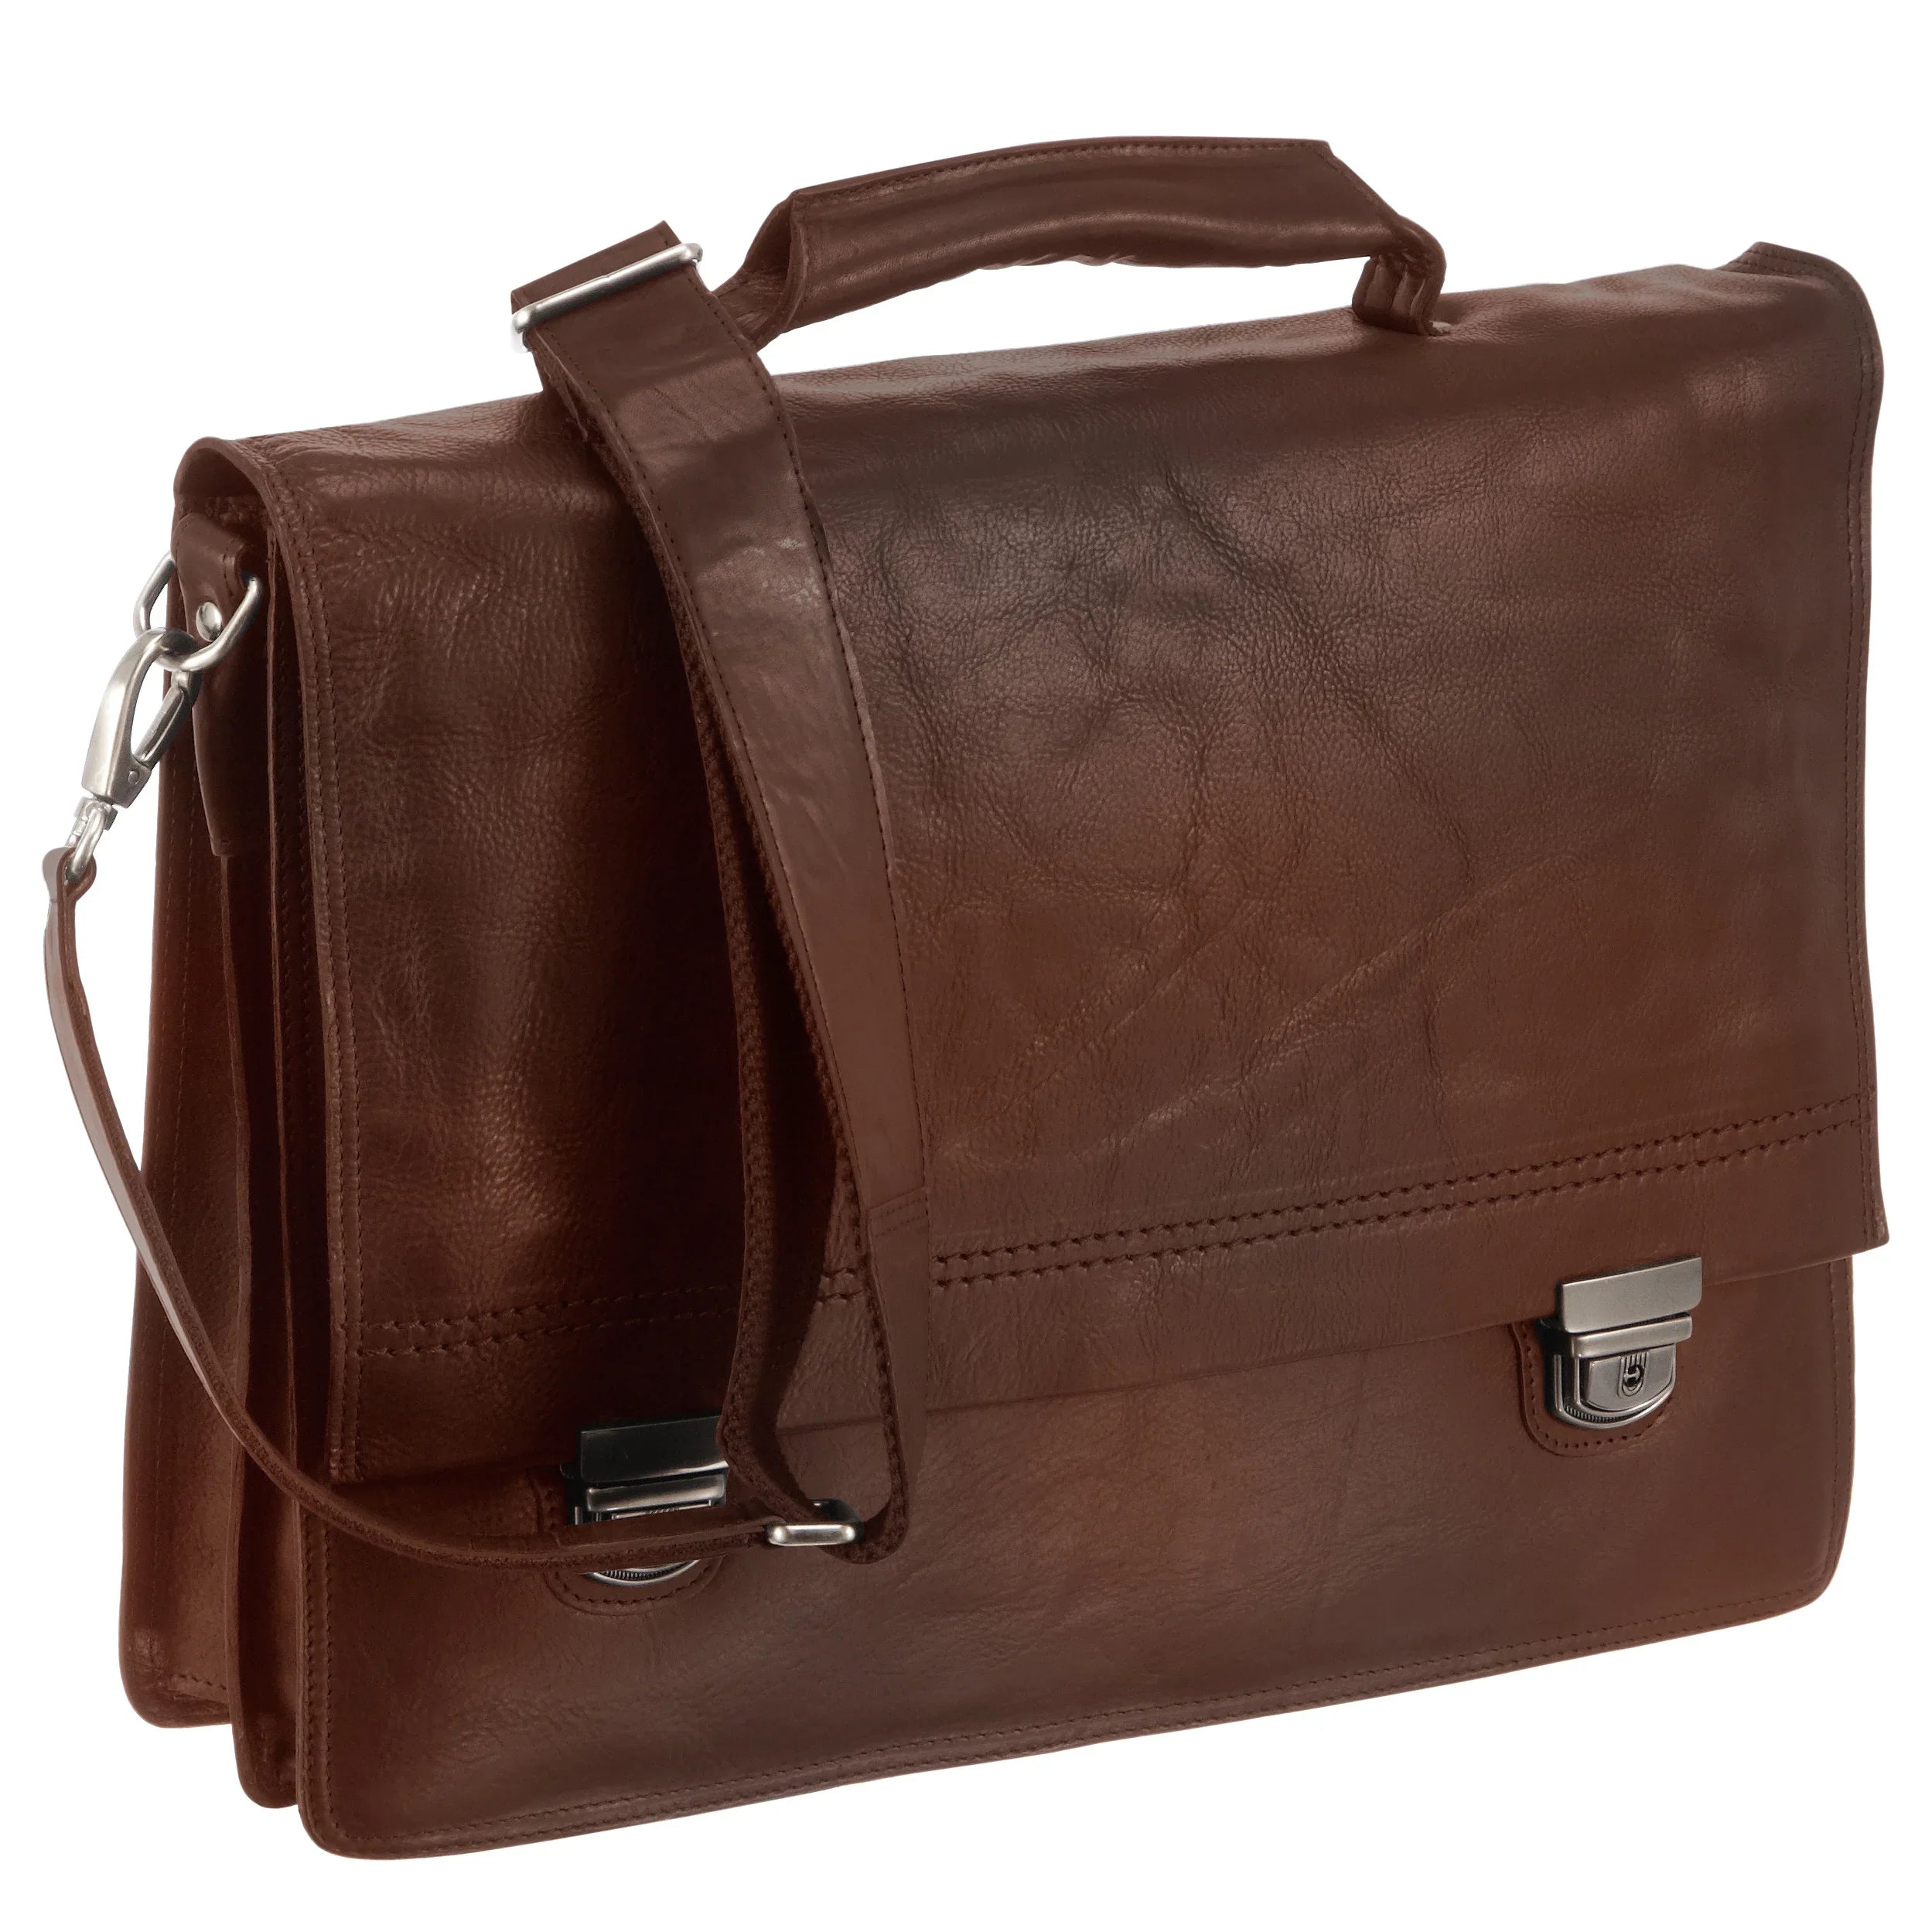 Harolds Saddle briefcase with laptop compartment 40 cm - brown